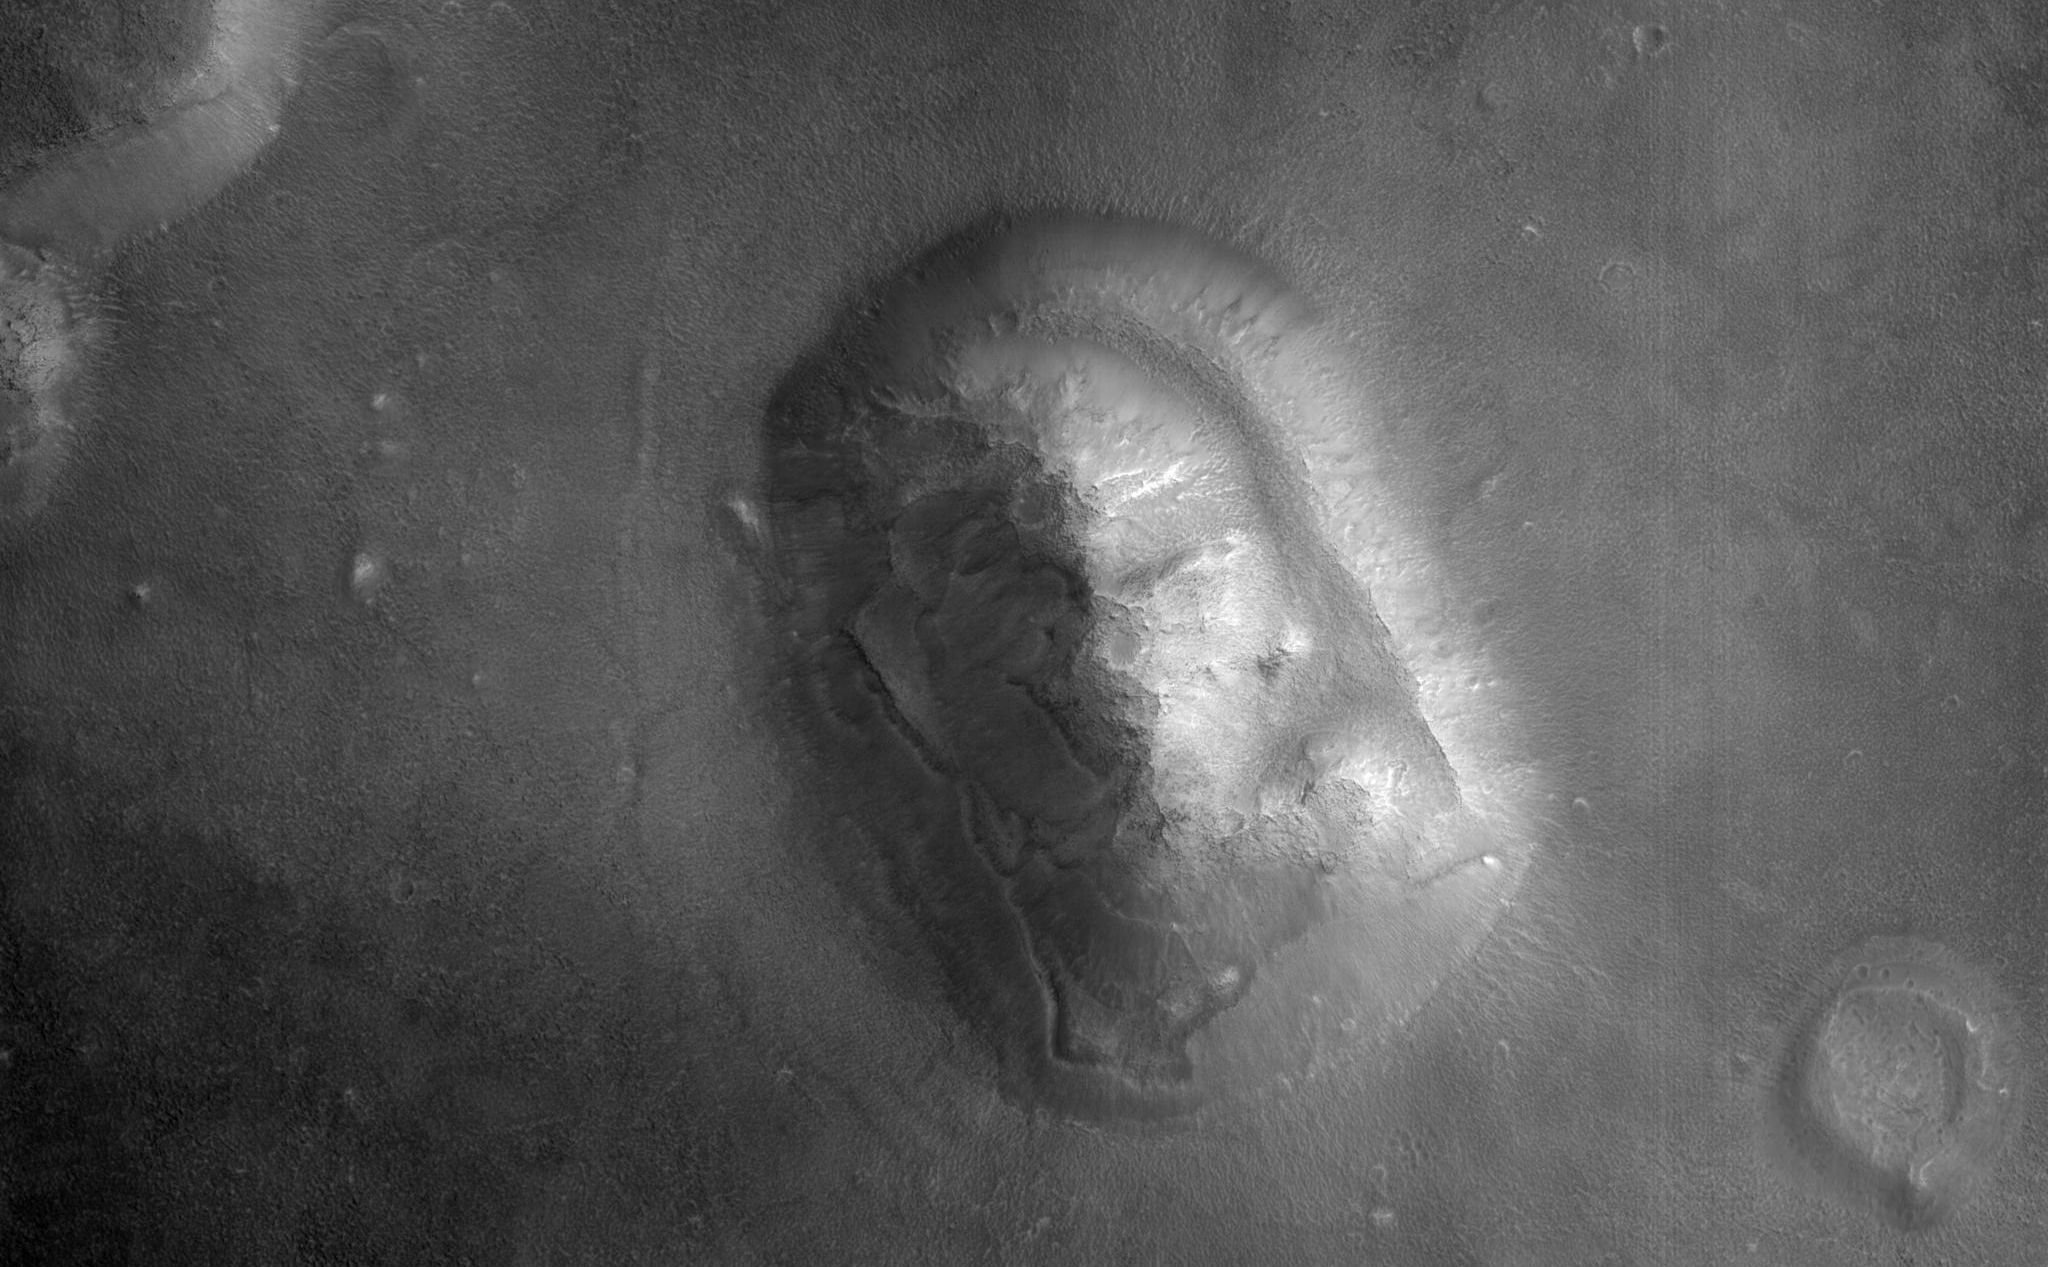 HiRISE captured this image of an eroded mesa made famous by its similarity to a human face in a Viking Orbiter image with much lower spatial resolution and a different lighting geometry.